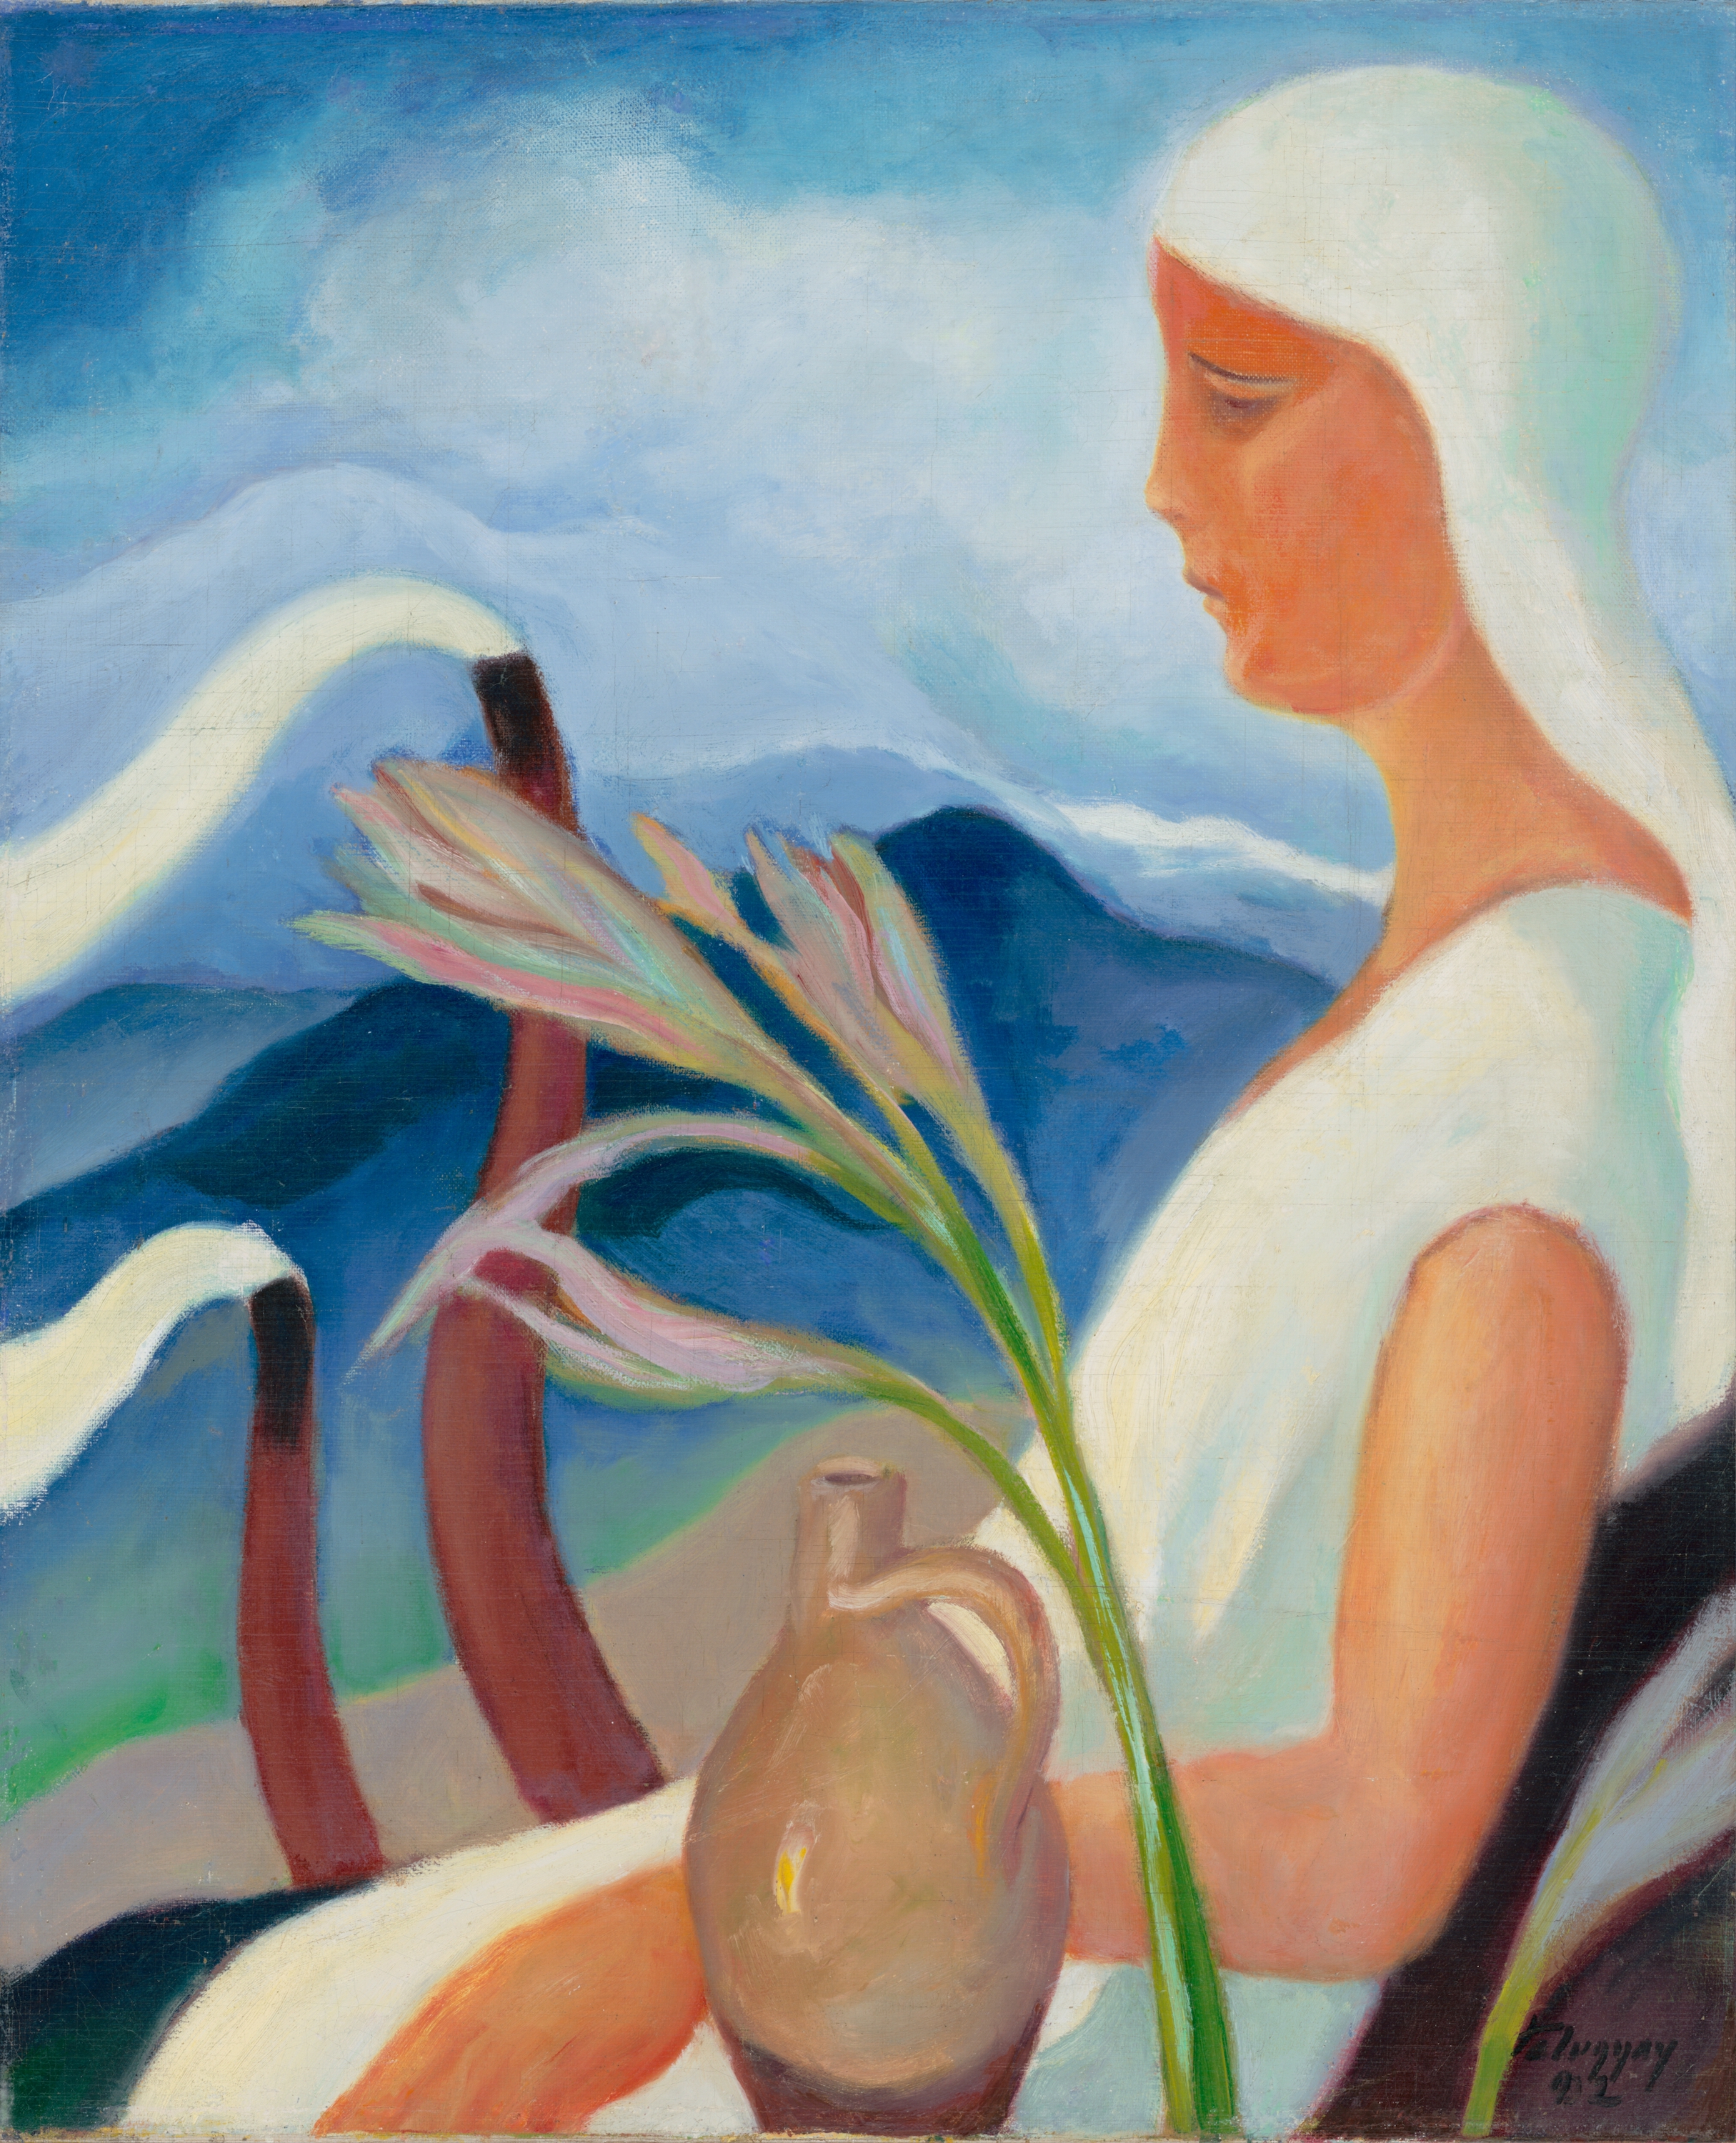 Girl in White with Factory Chimneys and Flowers by Zoltán Palugyay - 1932 - 61.5 x 51.5 cm Europeana